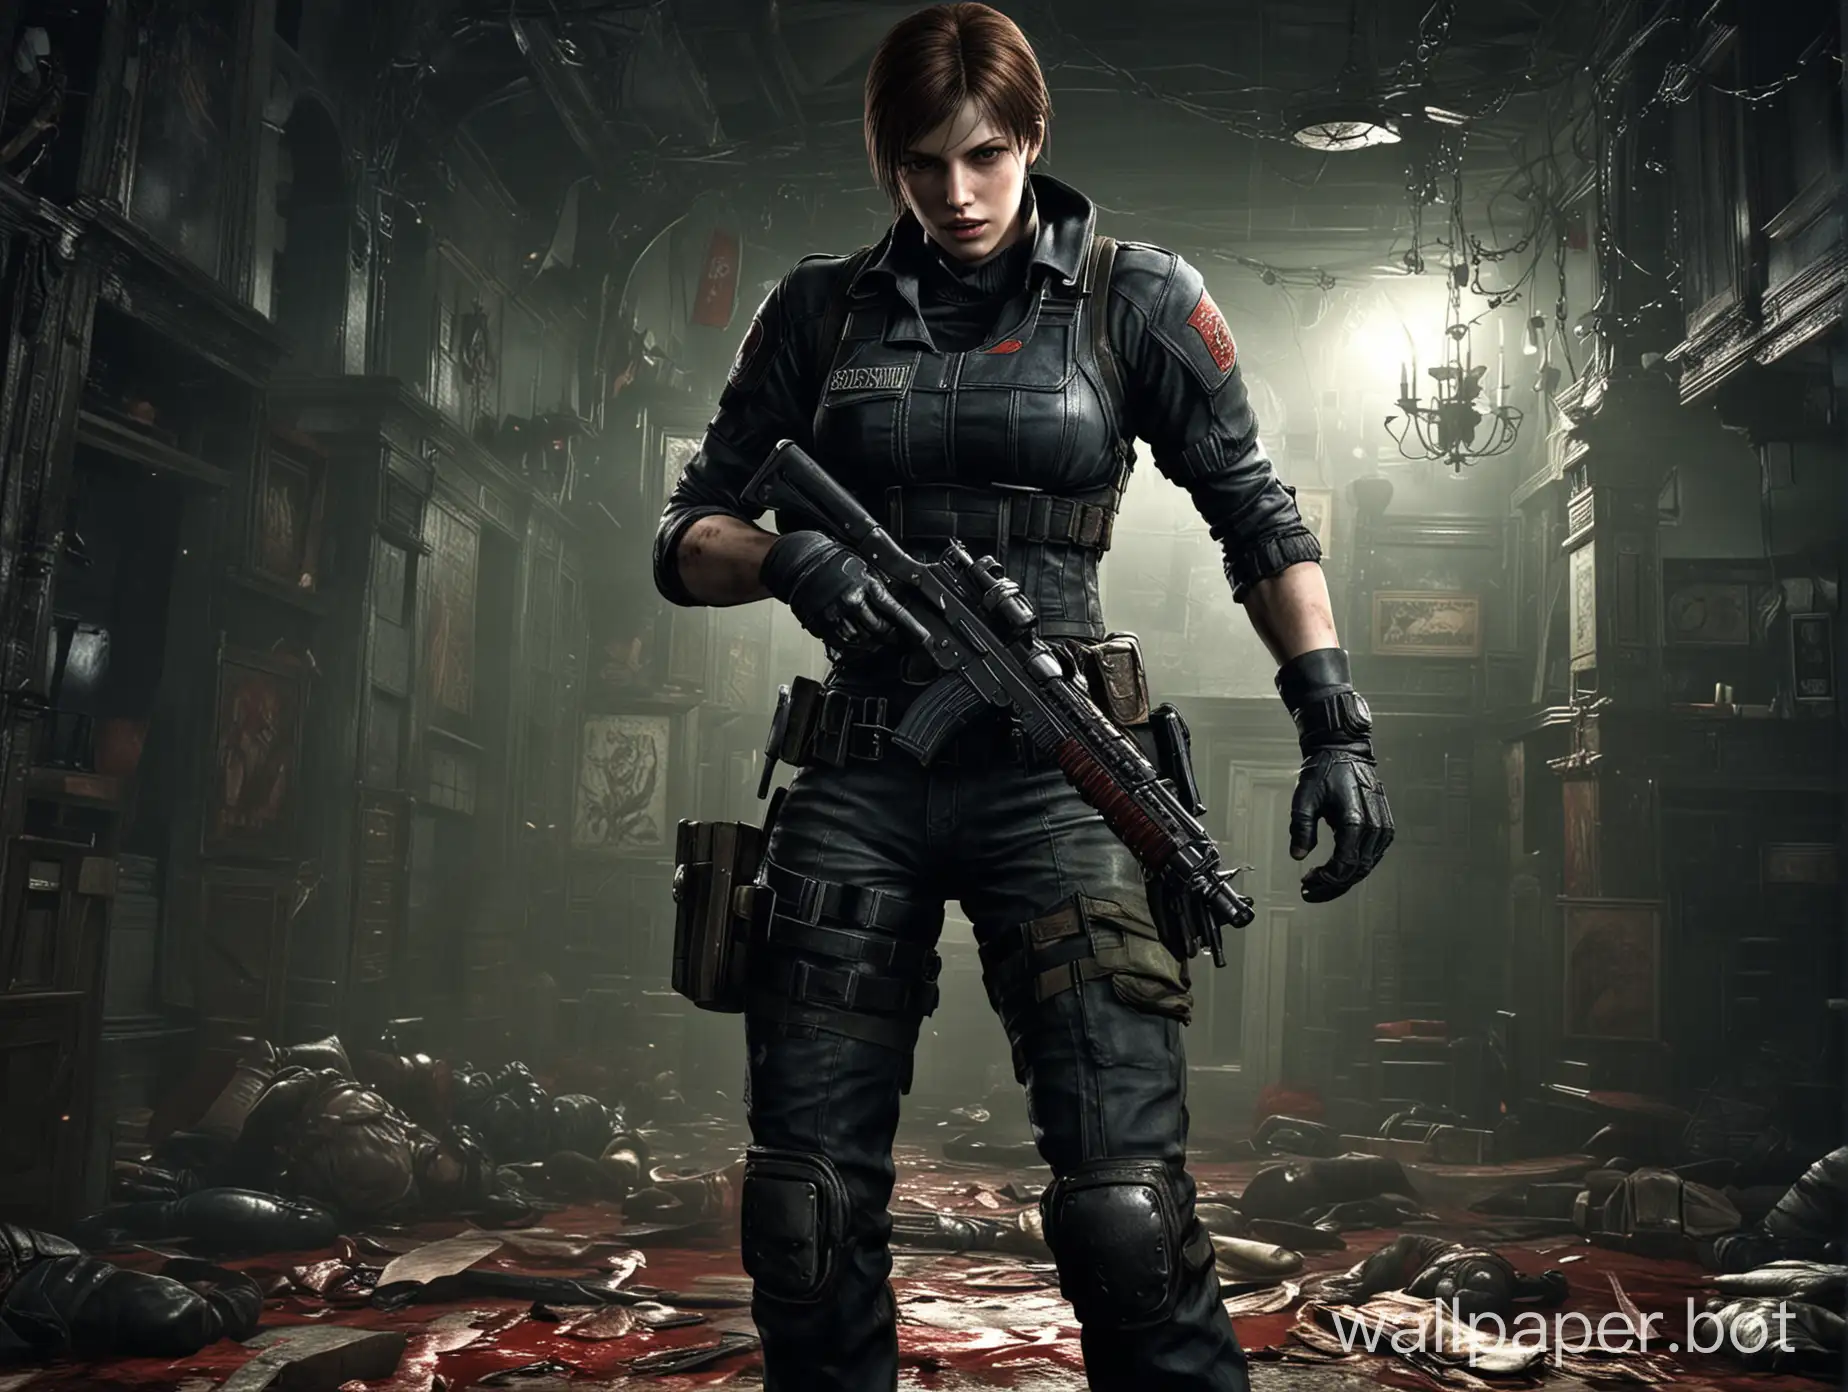 Resident-Evil-GameThemed-Wallpapers-for-Gaming-Enthusiasts